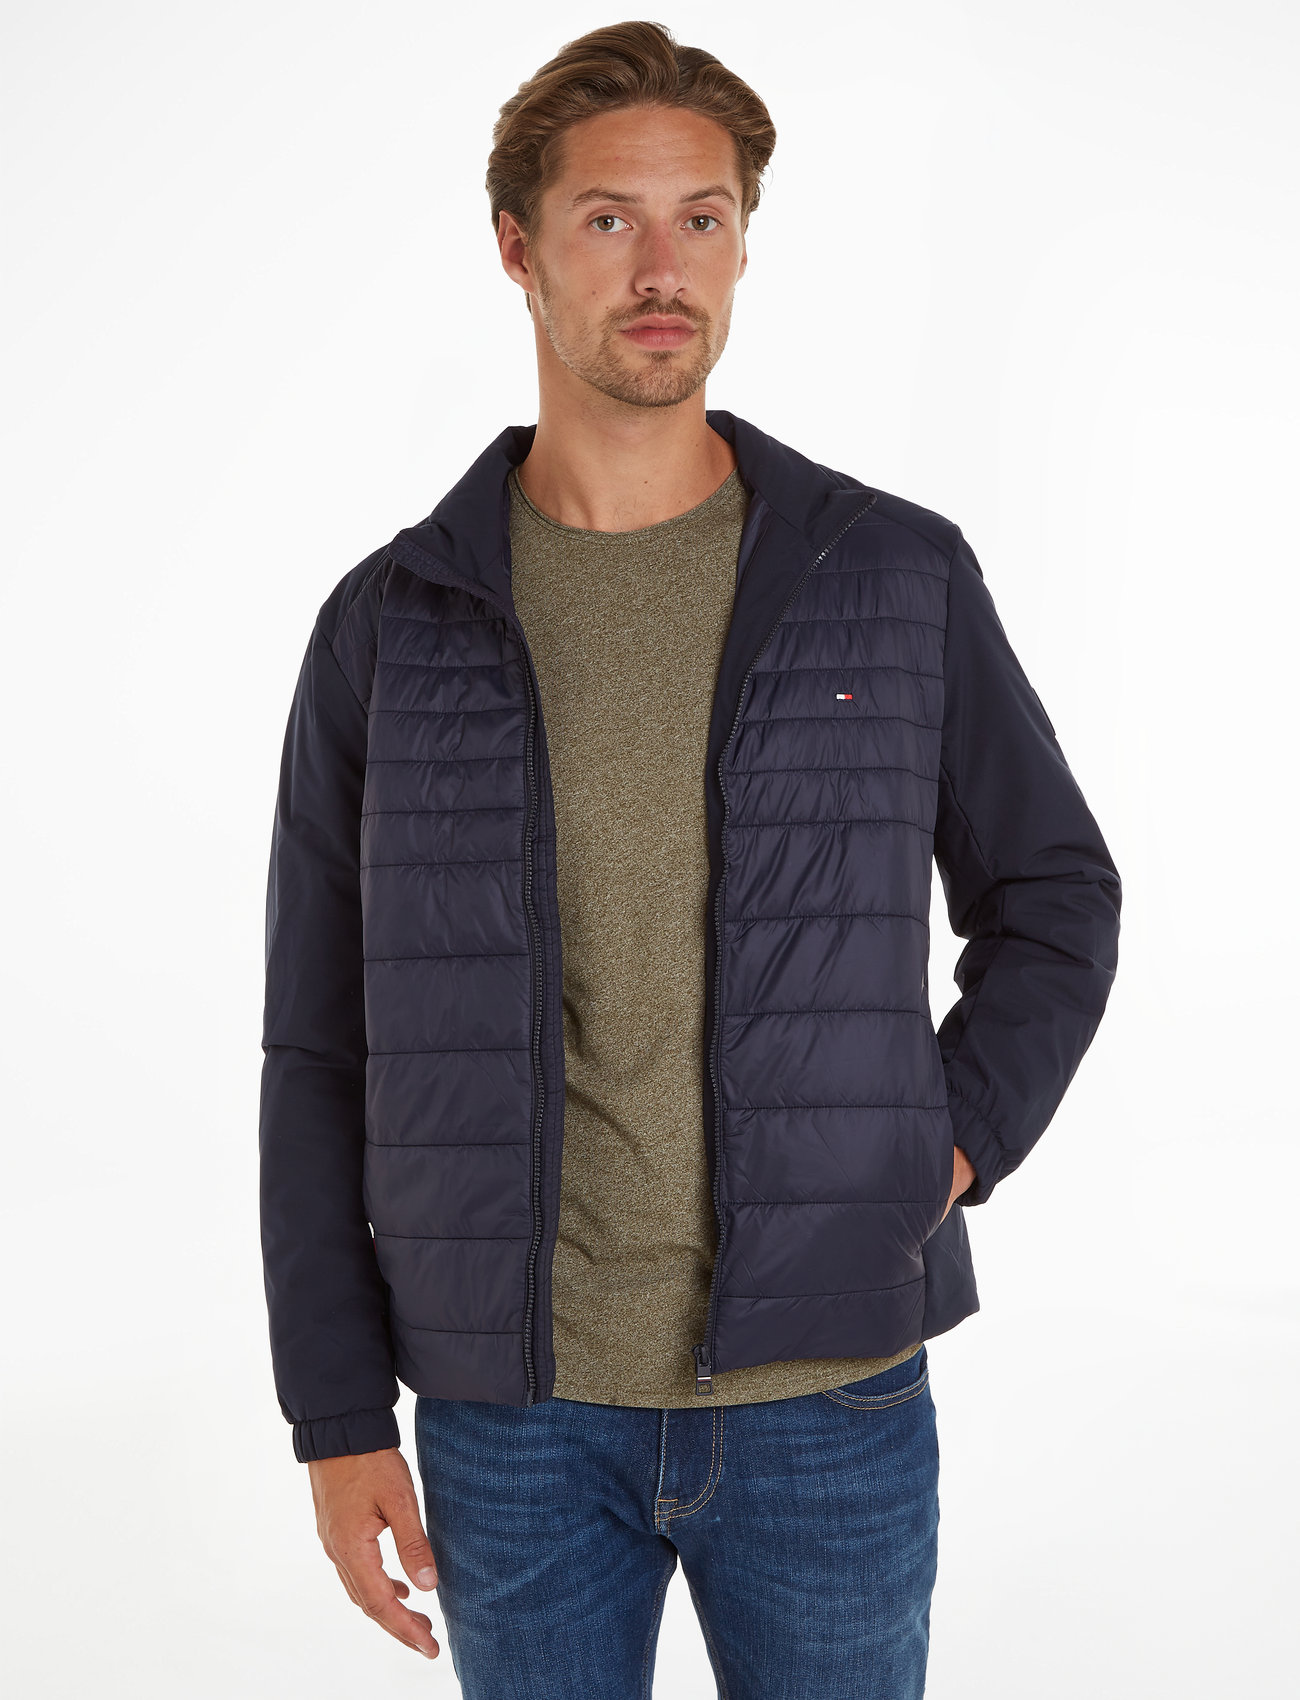 Stand Cl Mix Collar and 129.94 Buy Fast Tommy Hilfiger at €. online delivery Tommy - returns Quilted easy Boozt.com. Media Hilfiger jackets from Jacket